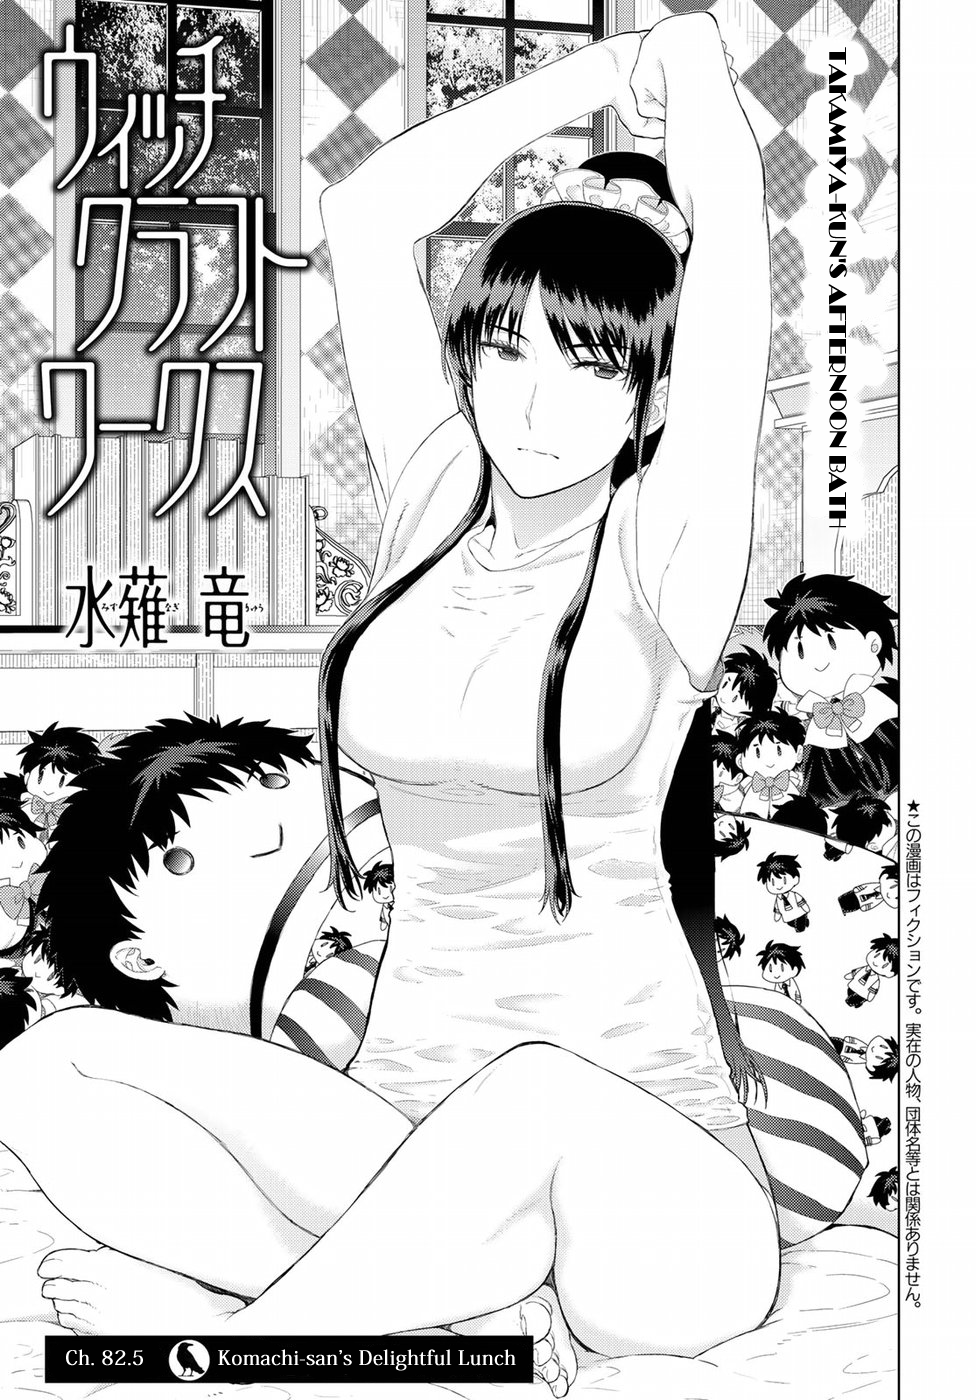 Witchcraft Works Chapter 82.5: Komachi-san Delightful Lunch